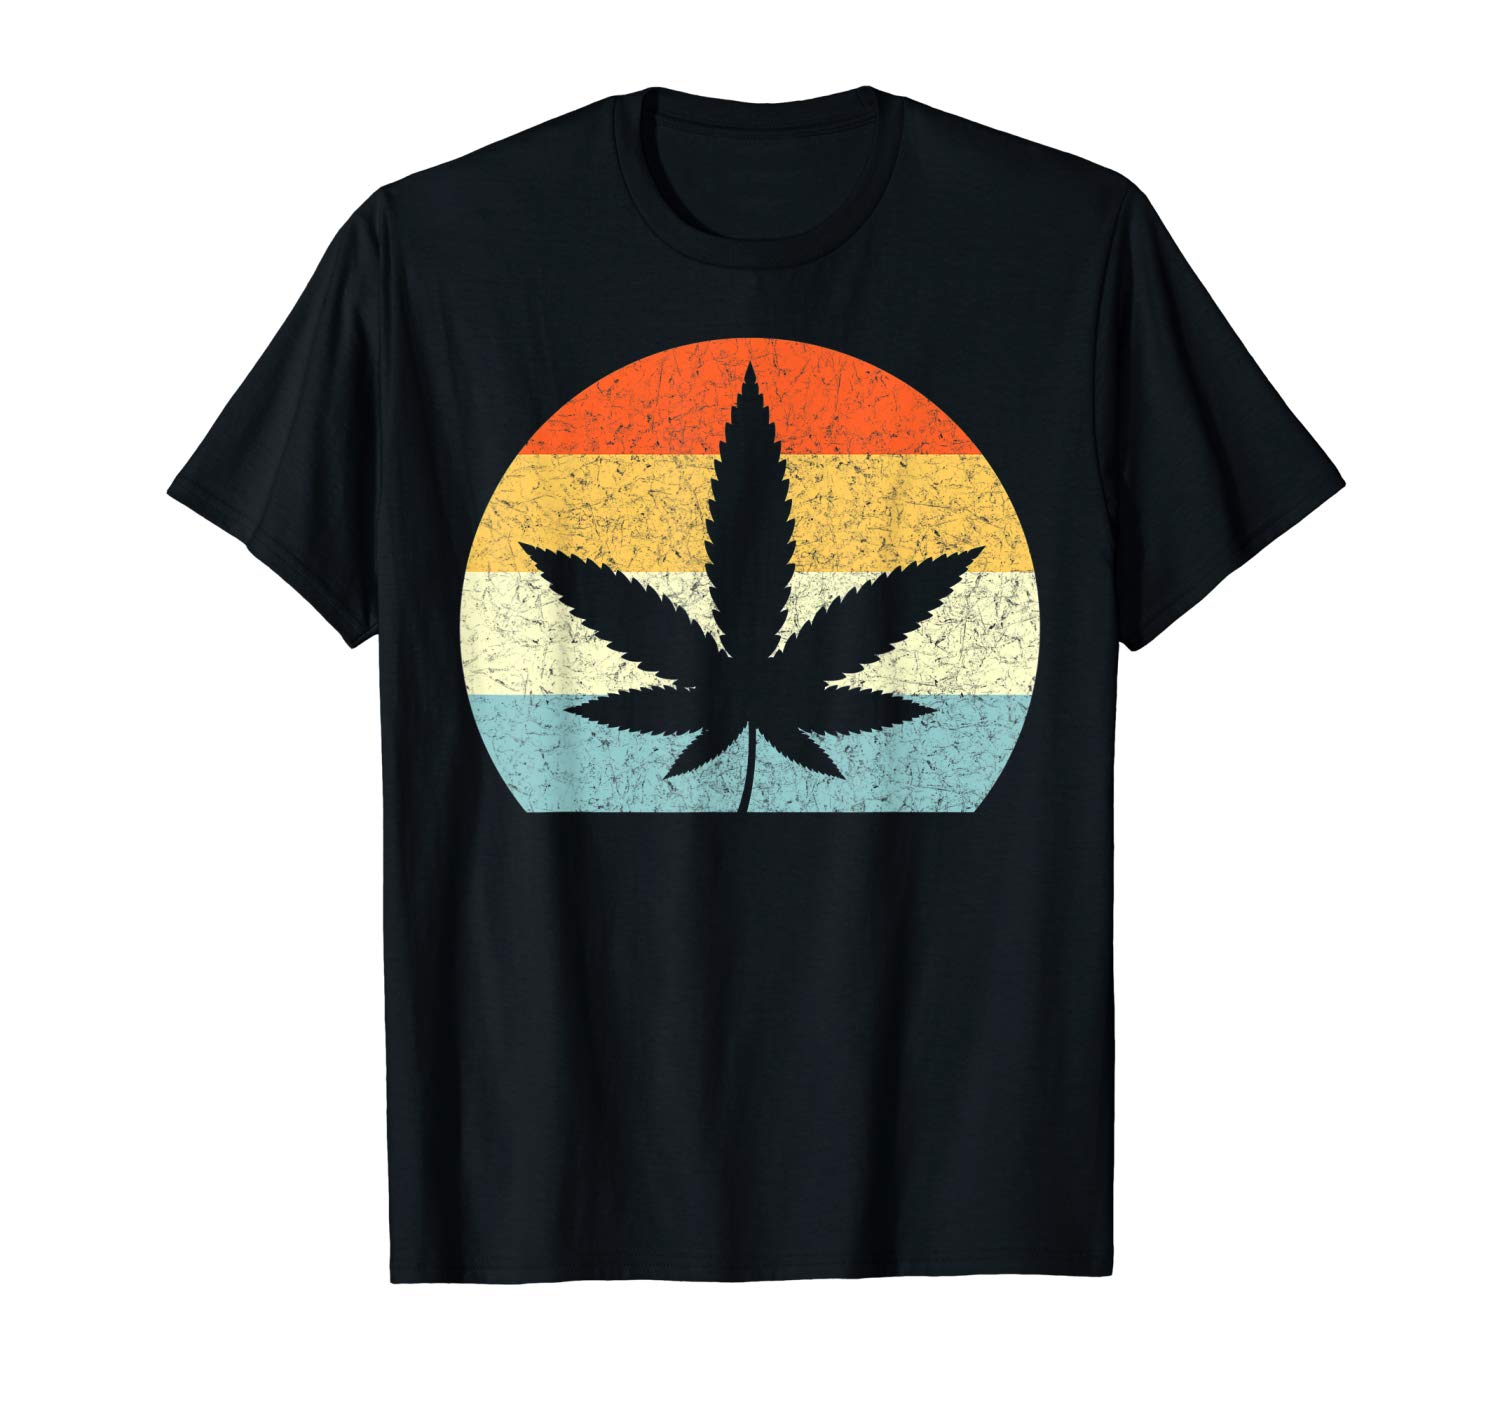 An image of a black retro marijuana leaf t-shirt from Ganja Outpost.